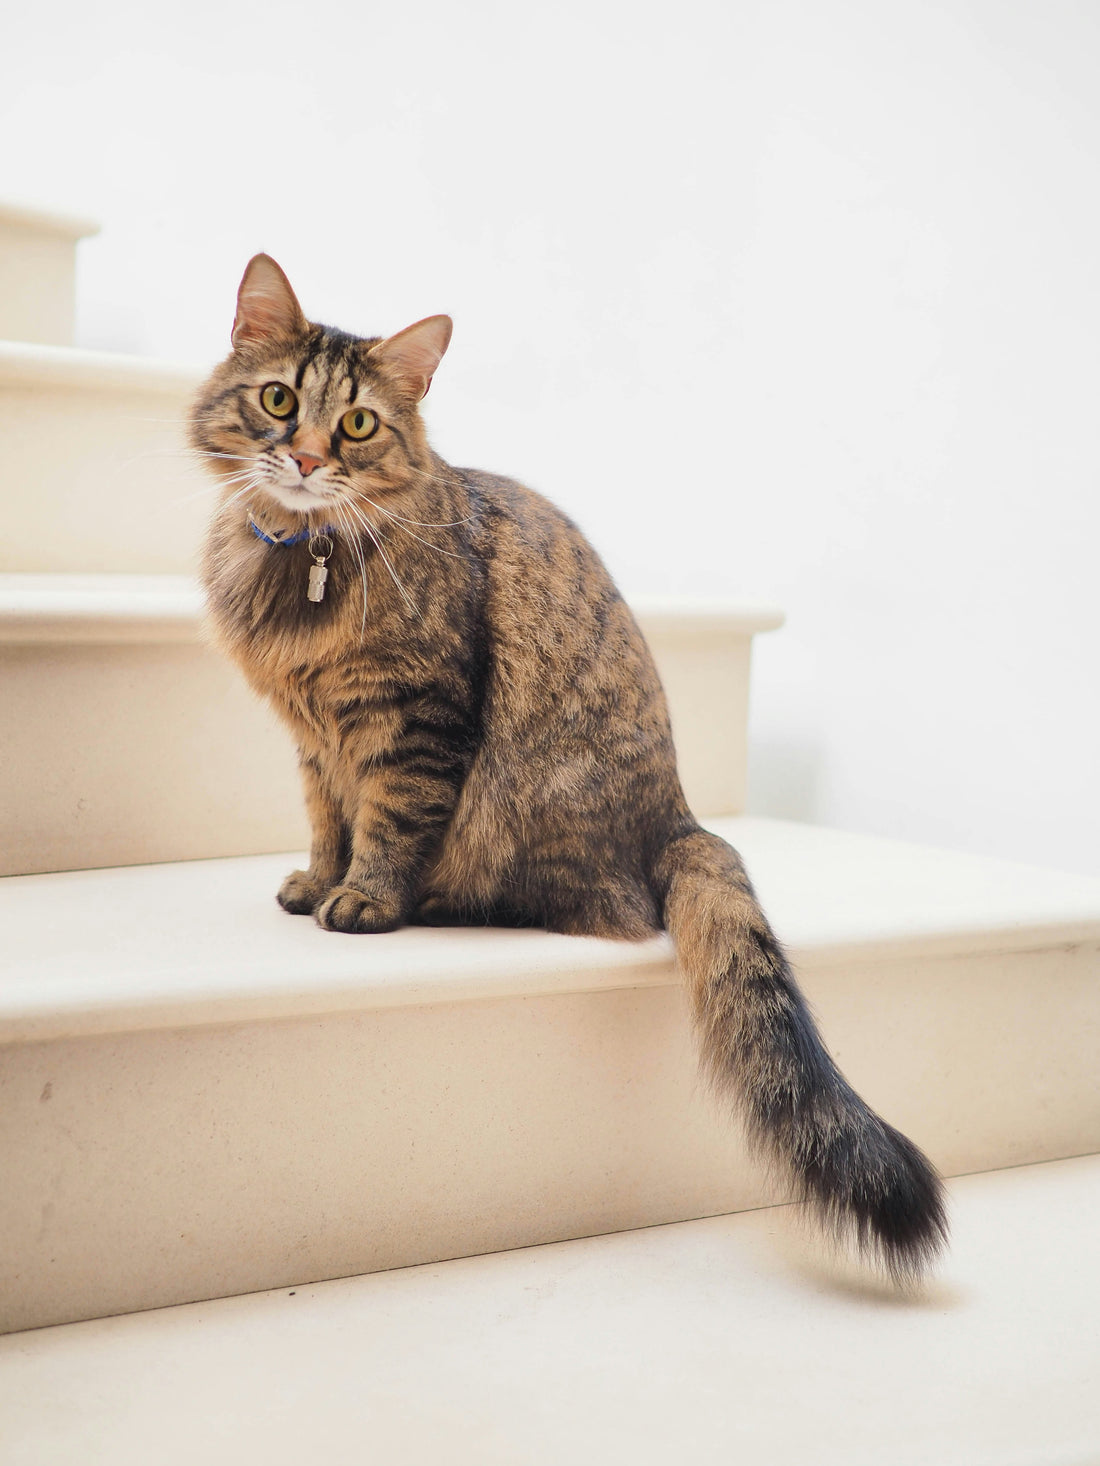 Home DIY Projects to Make for Your Cats